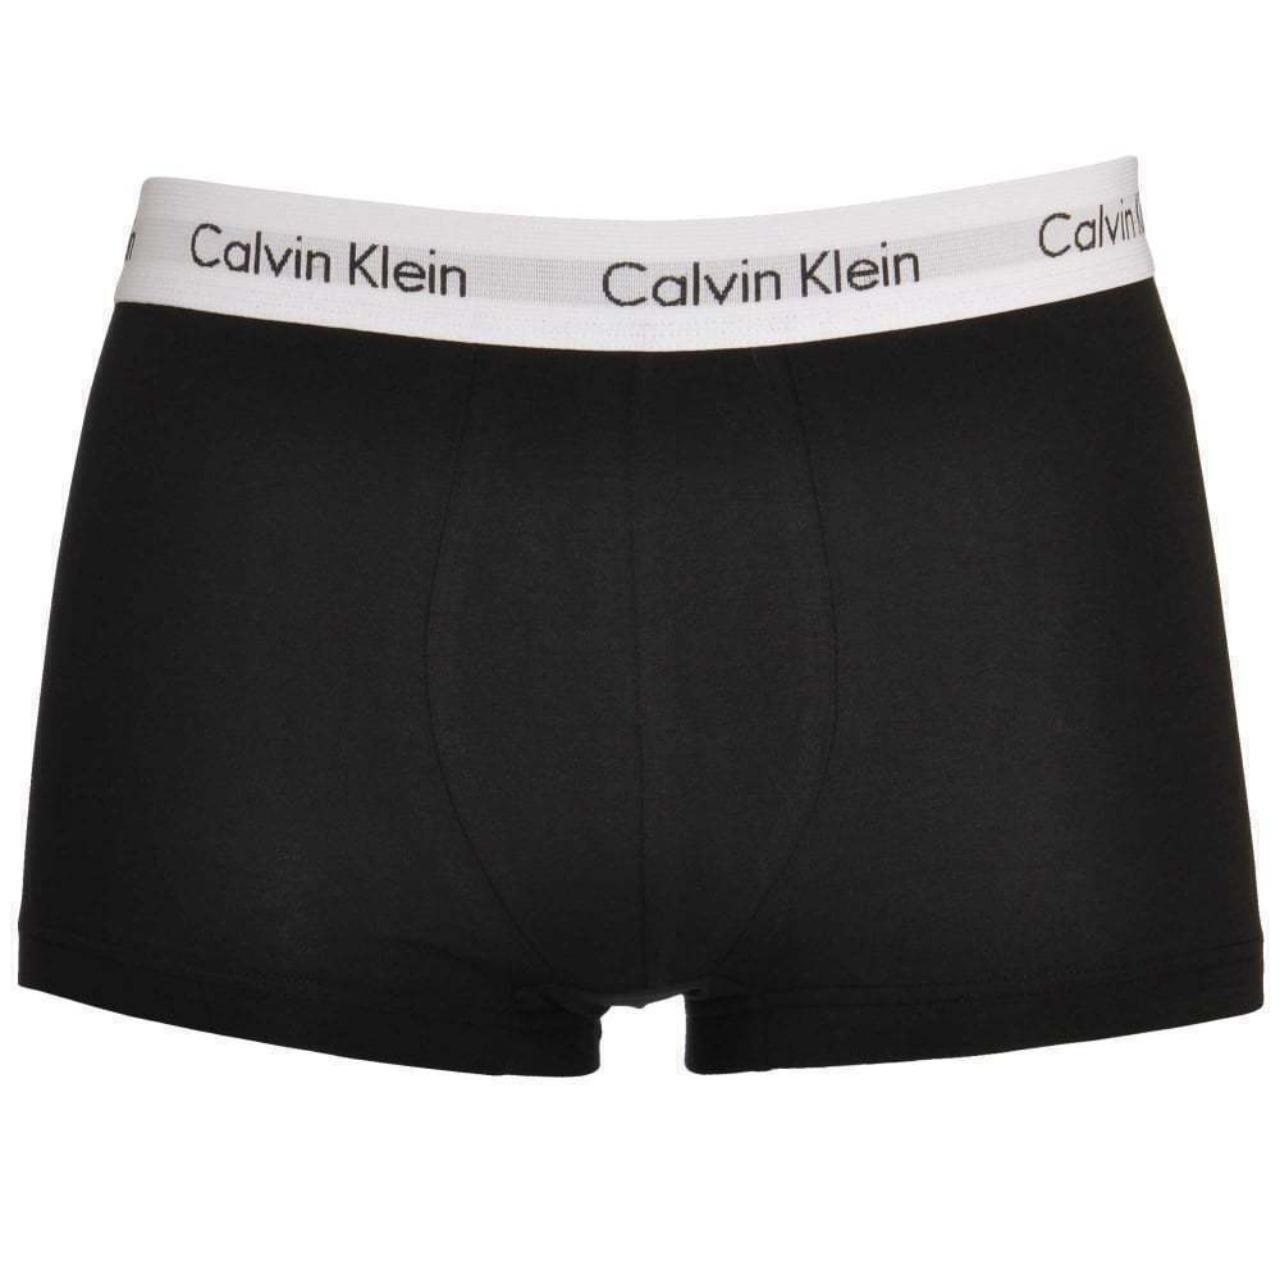 Calvin Klein Men's Black and White Boxers-and-briefs | Depop